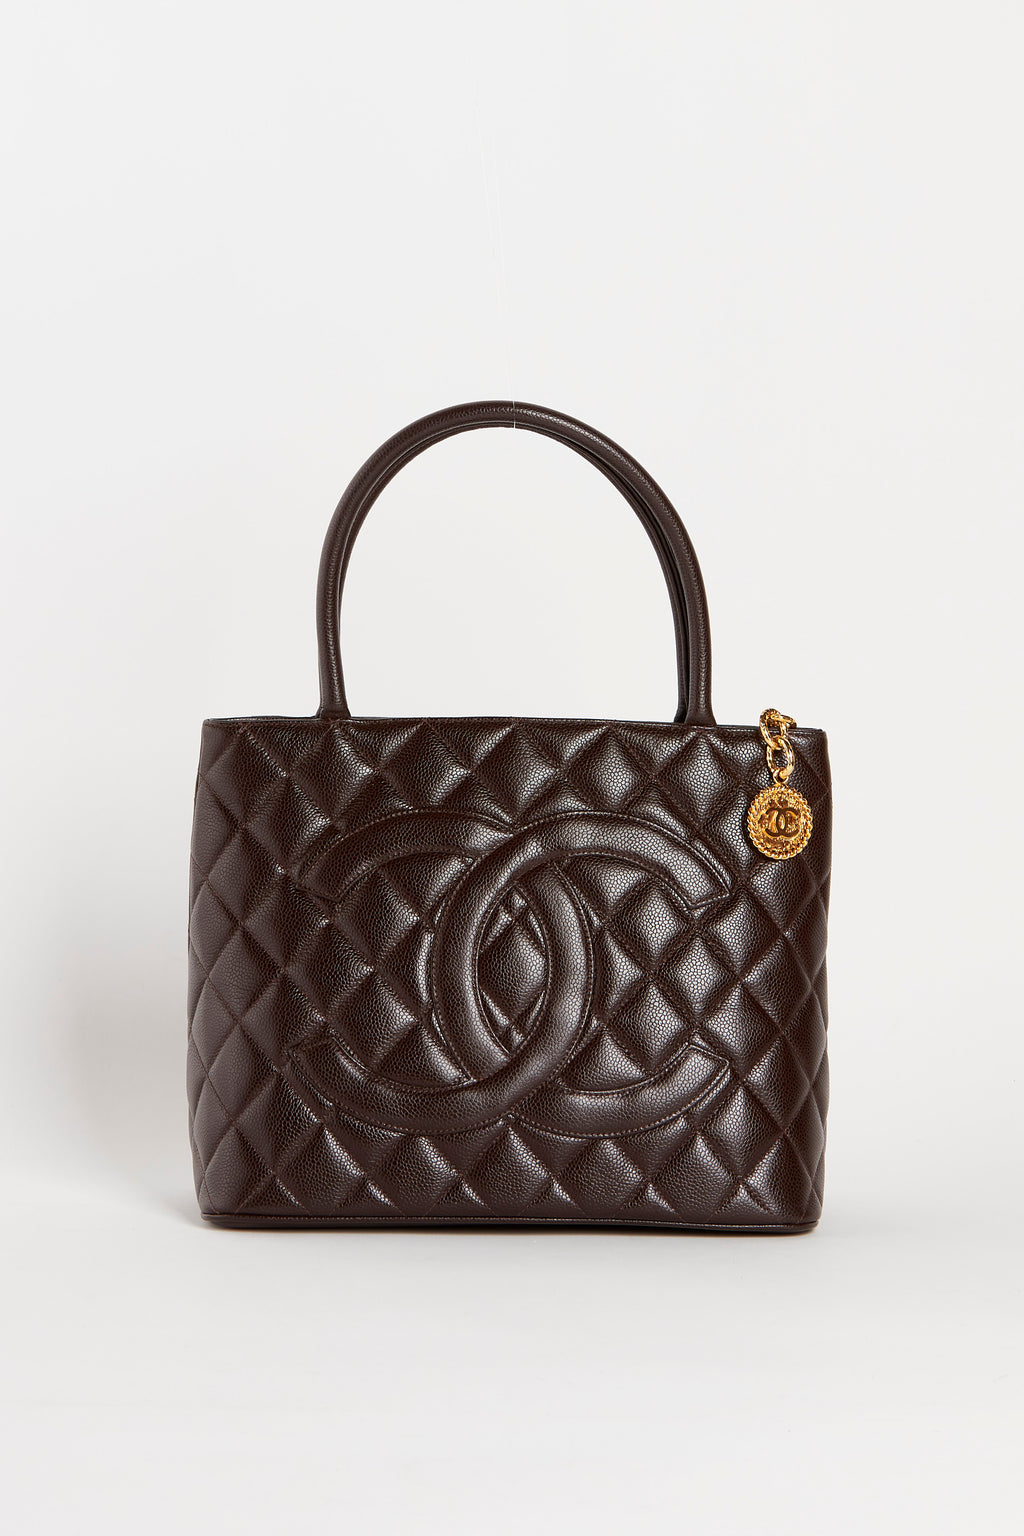 2000s Chanel Brown Caviar Gold Medallion Tote Bag